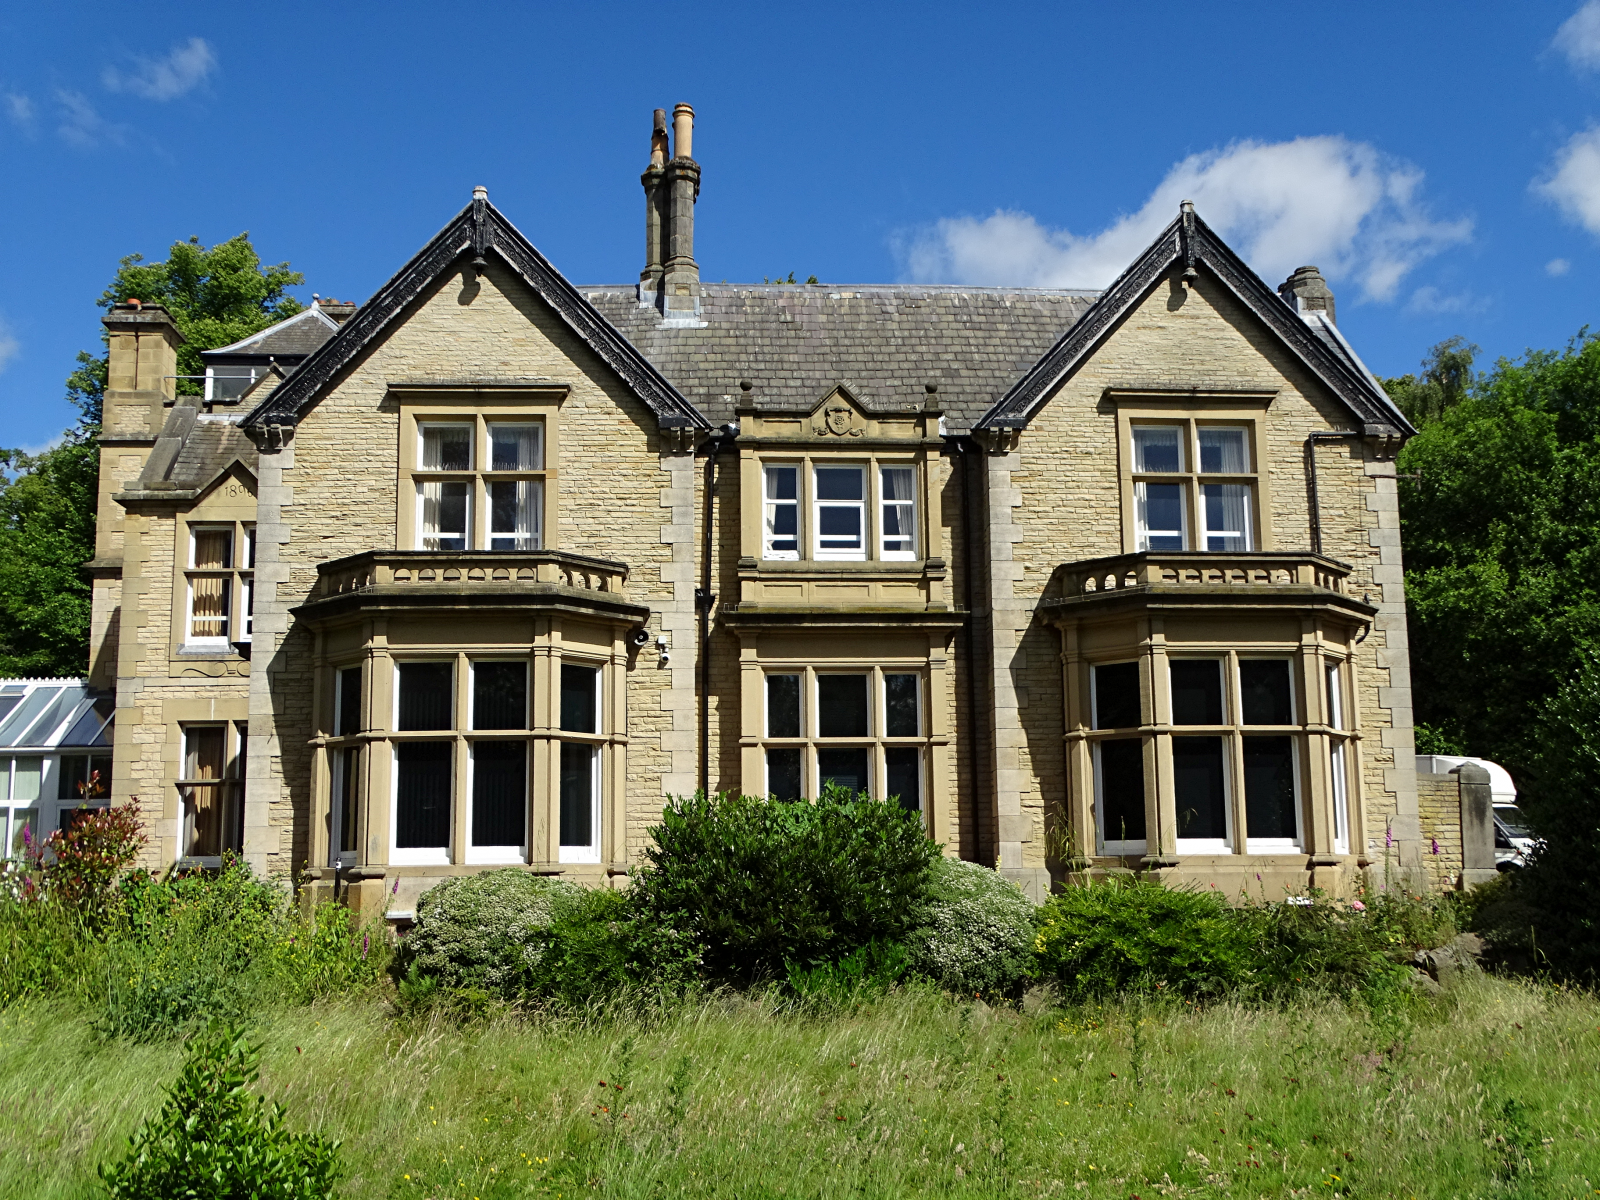 Tapton Cliffe former home of John Yeomans Cowlishaw up to his suicide in 1895. John was a reknow cutlery manufacturer.png